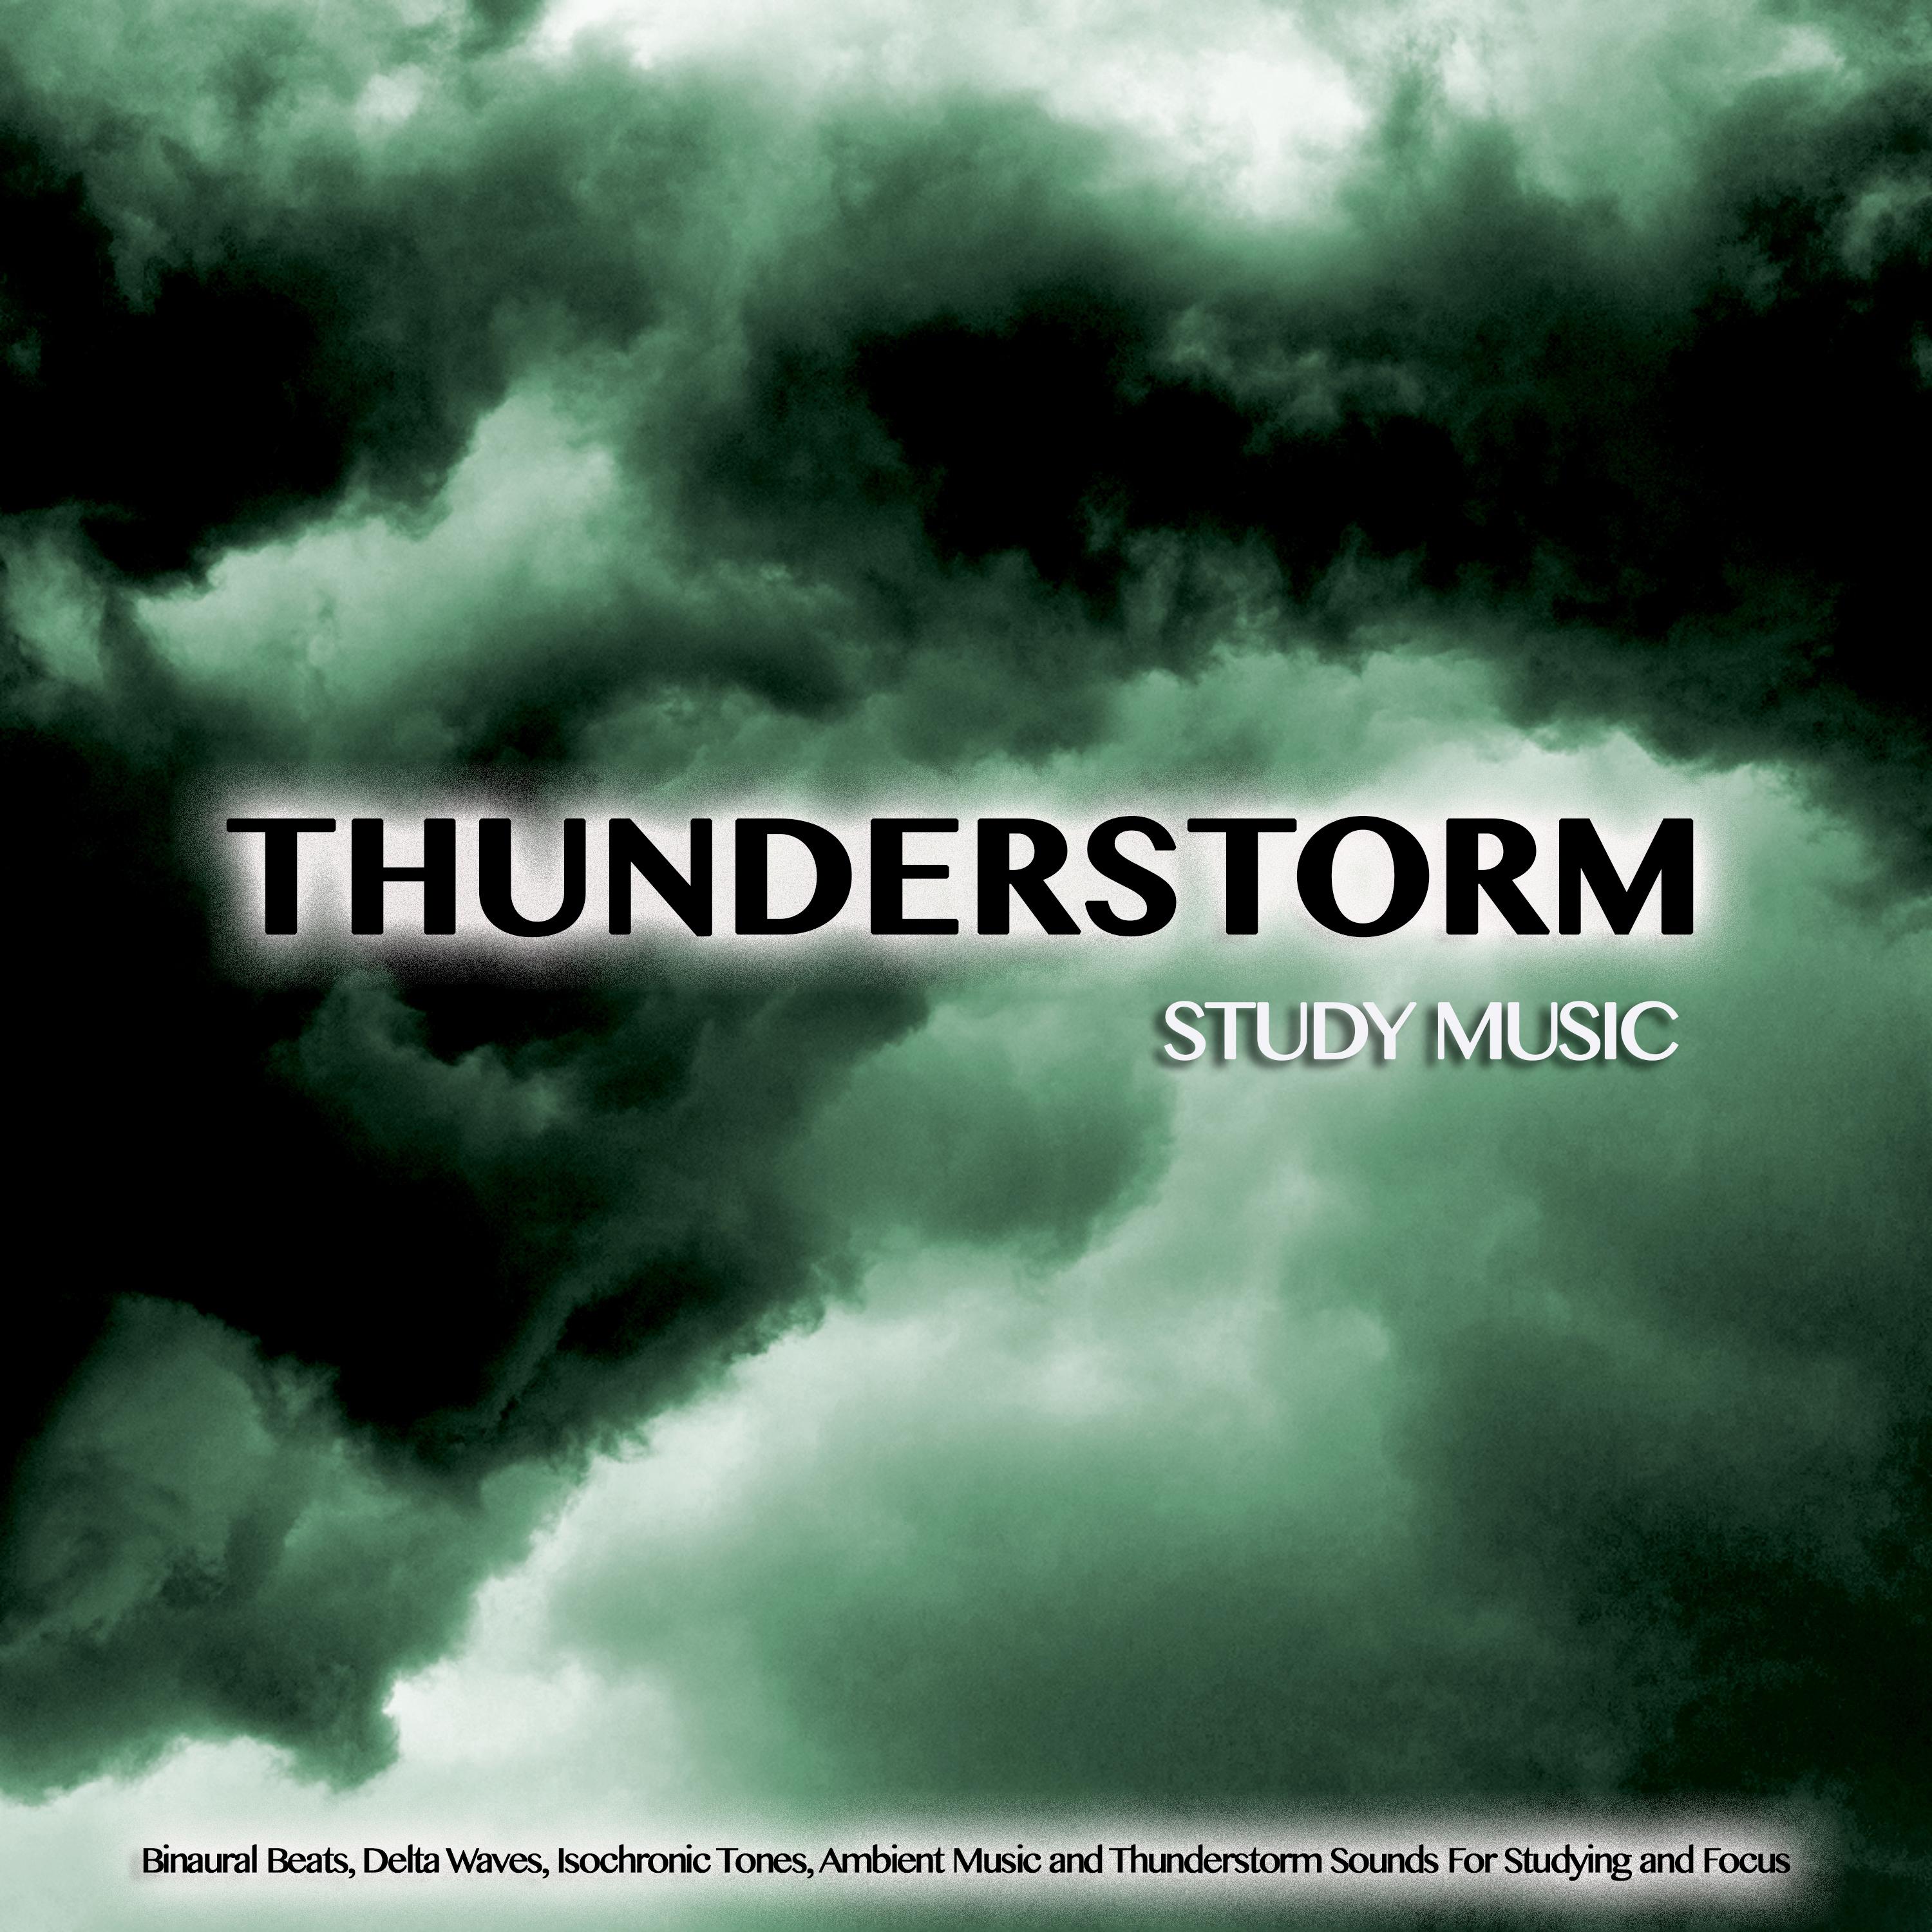 Thunderstorm Study Music: Binaural Beats, Delta Waves, Isochronic Tones, Ambient Music and Thunderstorm Sounds For Studying and Focus